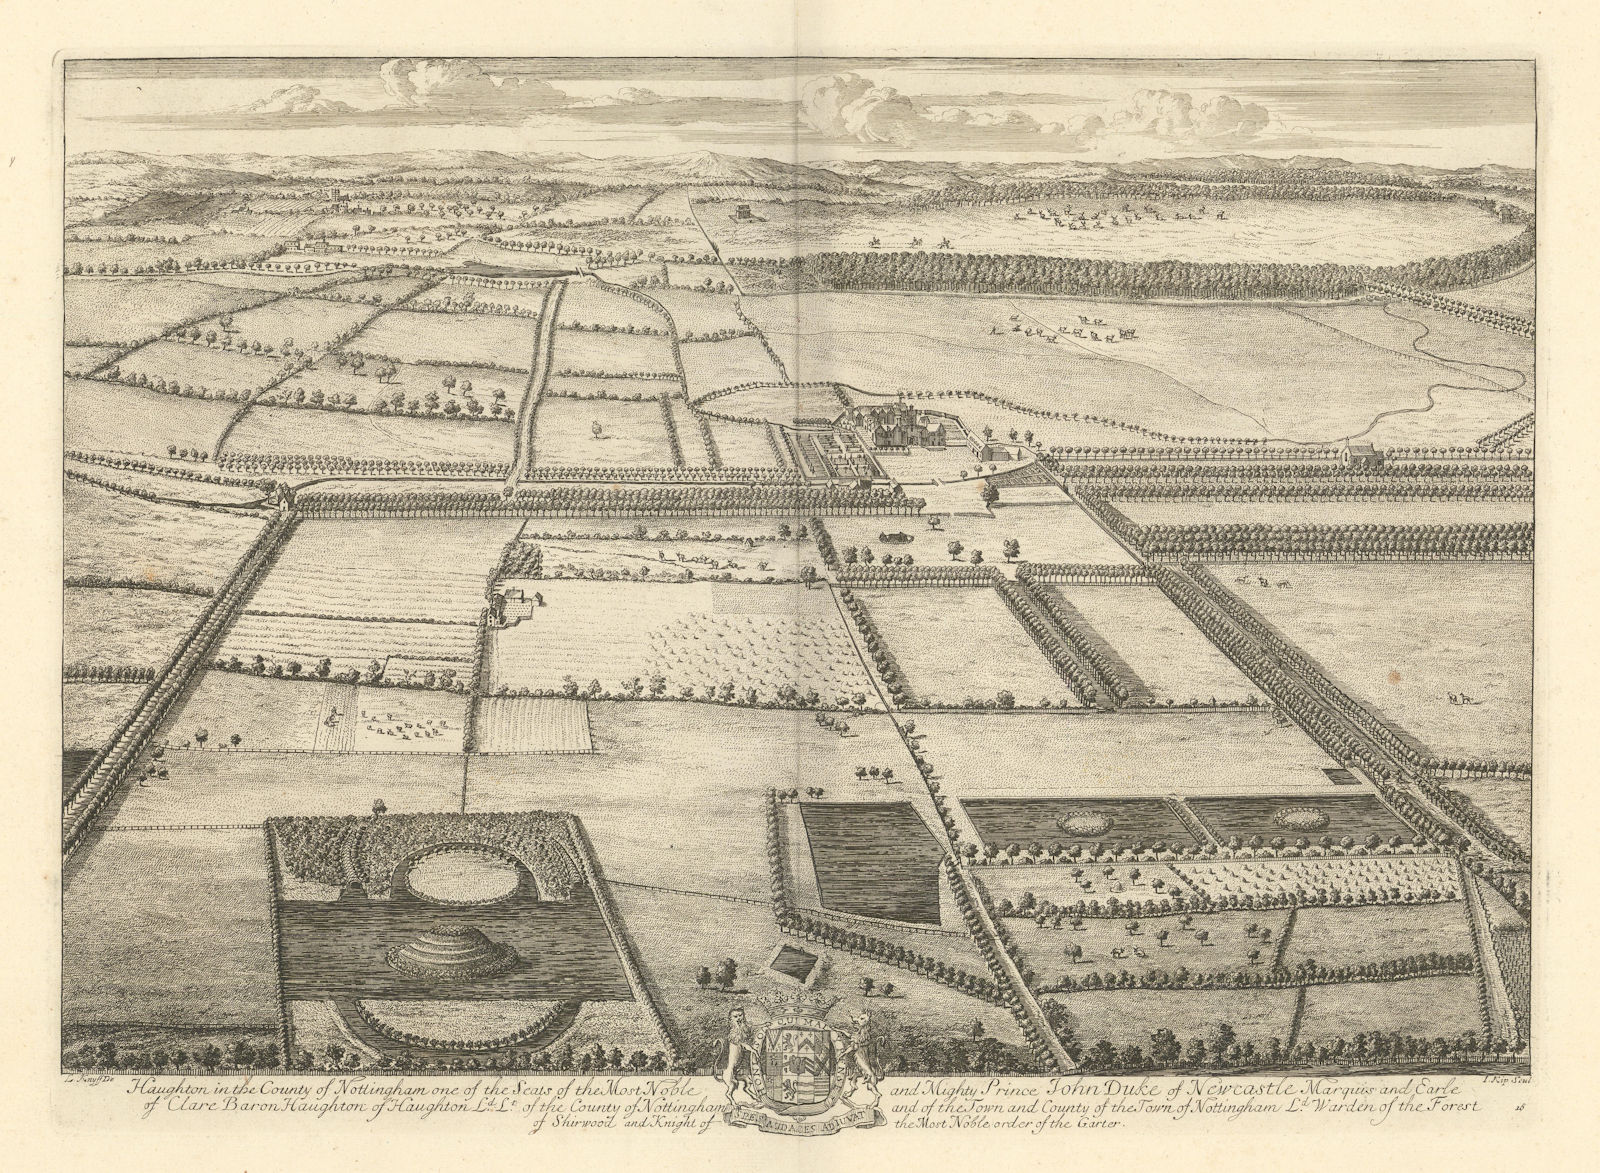 Haughton Hall by Kip & Knyff. "Haughton in the County of Nottingham" 1709